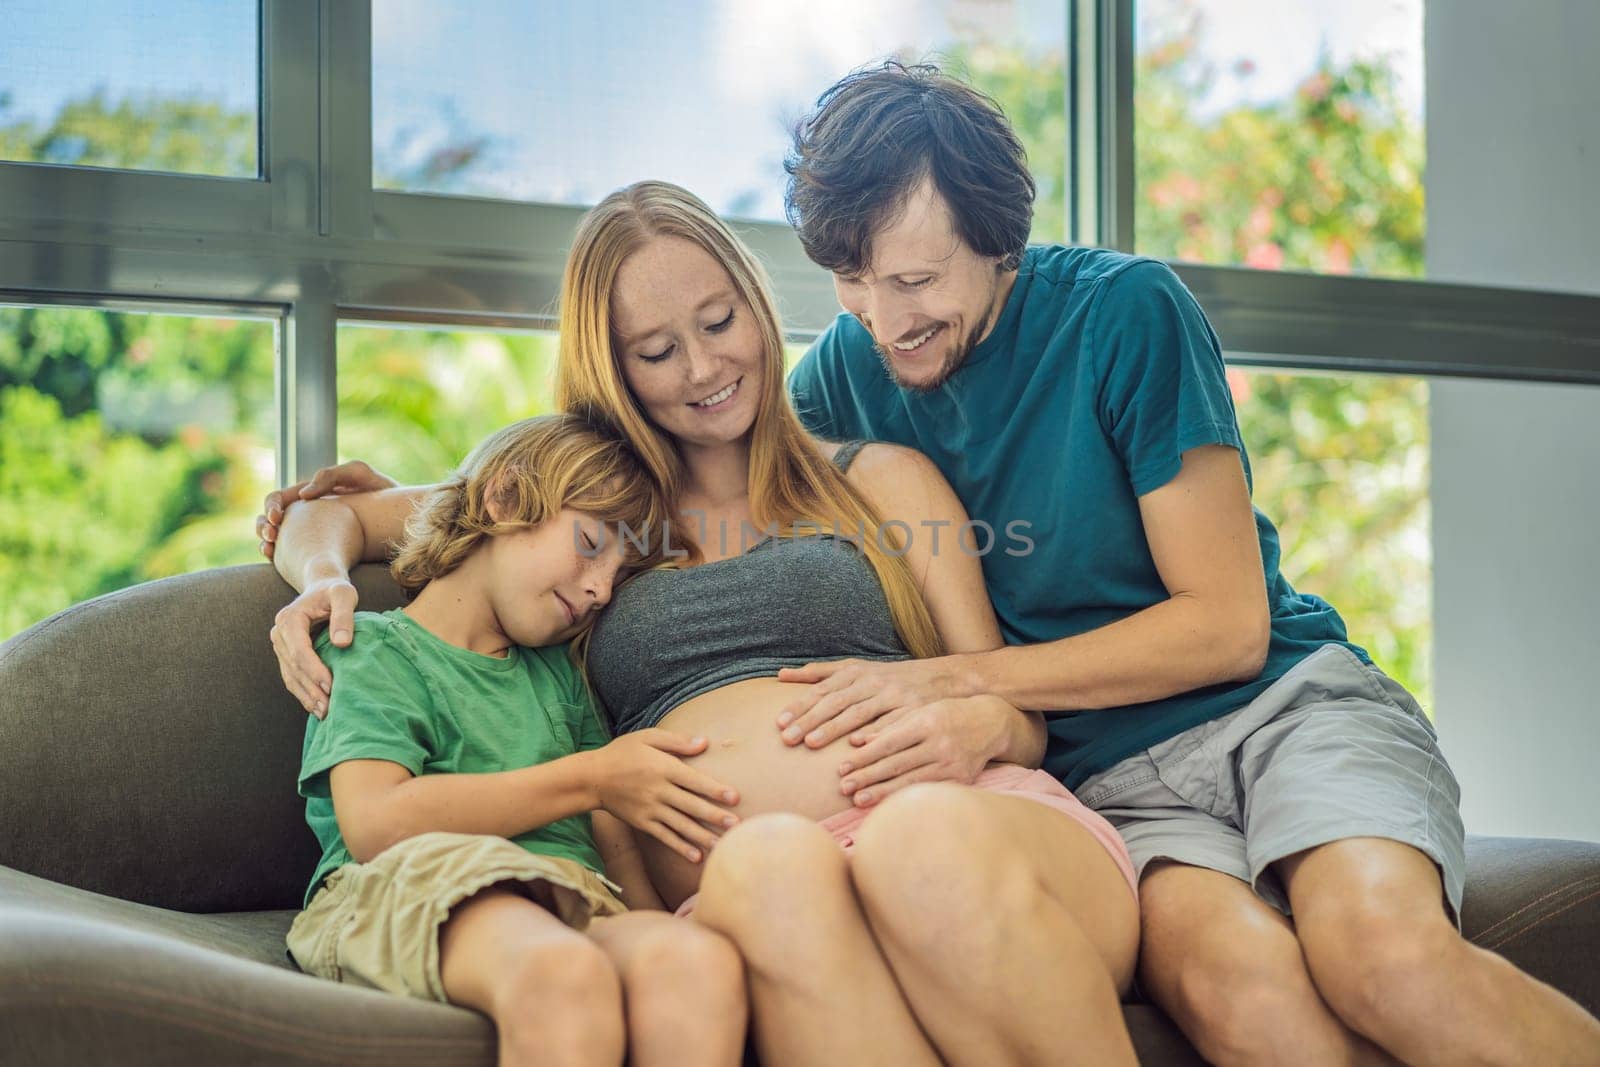 Expectant parents, mom, dad, and their eldest son share a heartwarming moment on the sofa, discussing the exciting journey of pregnancy.